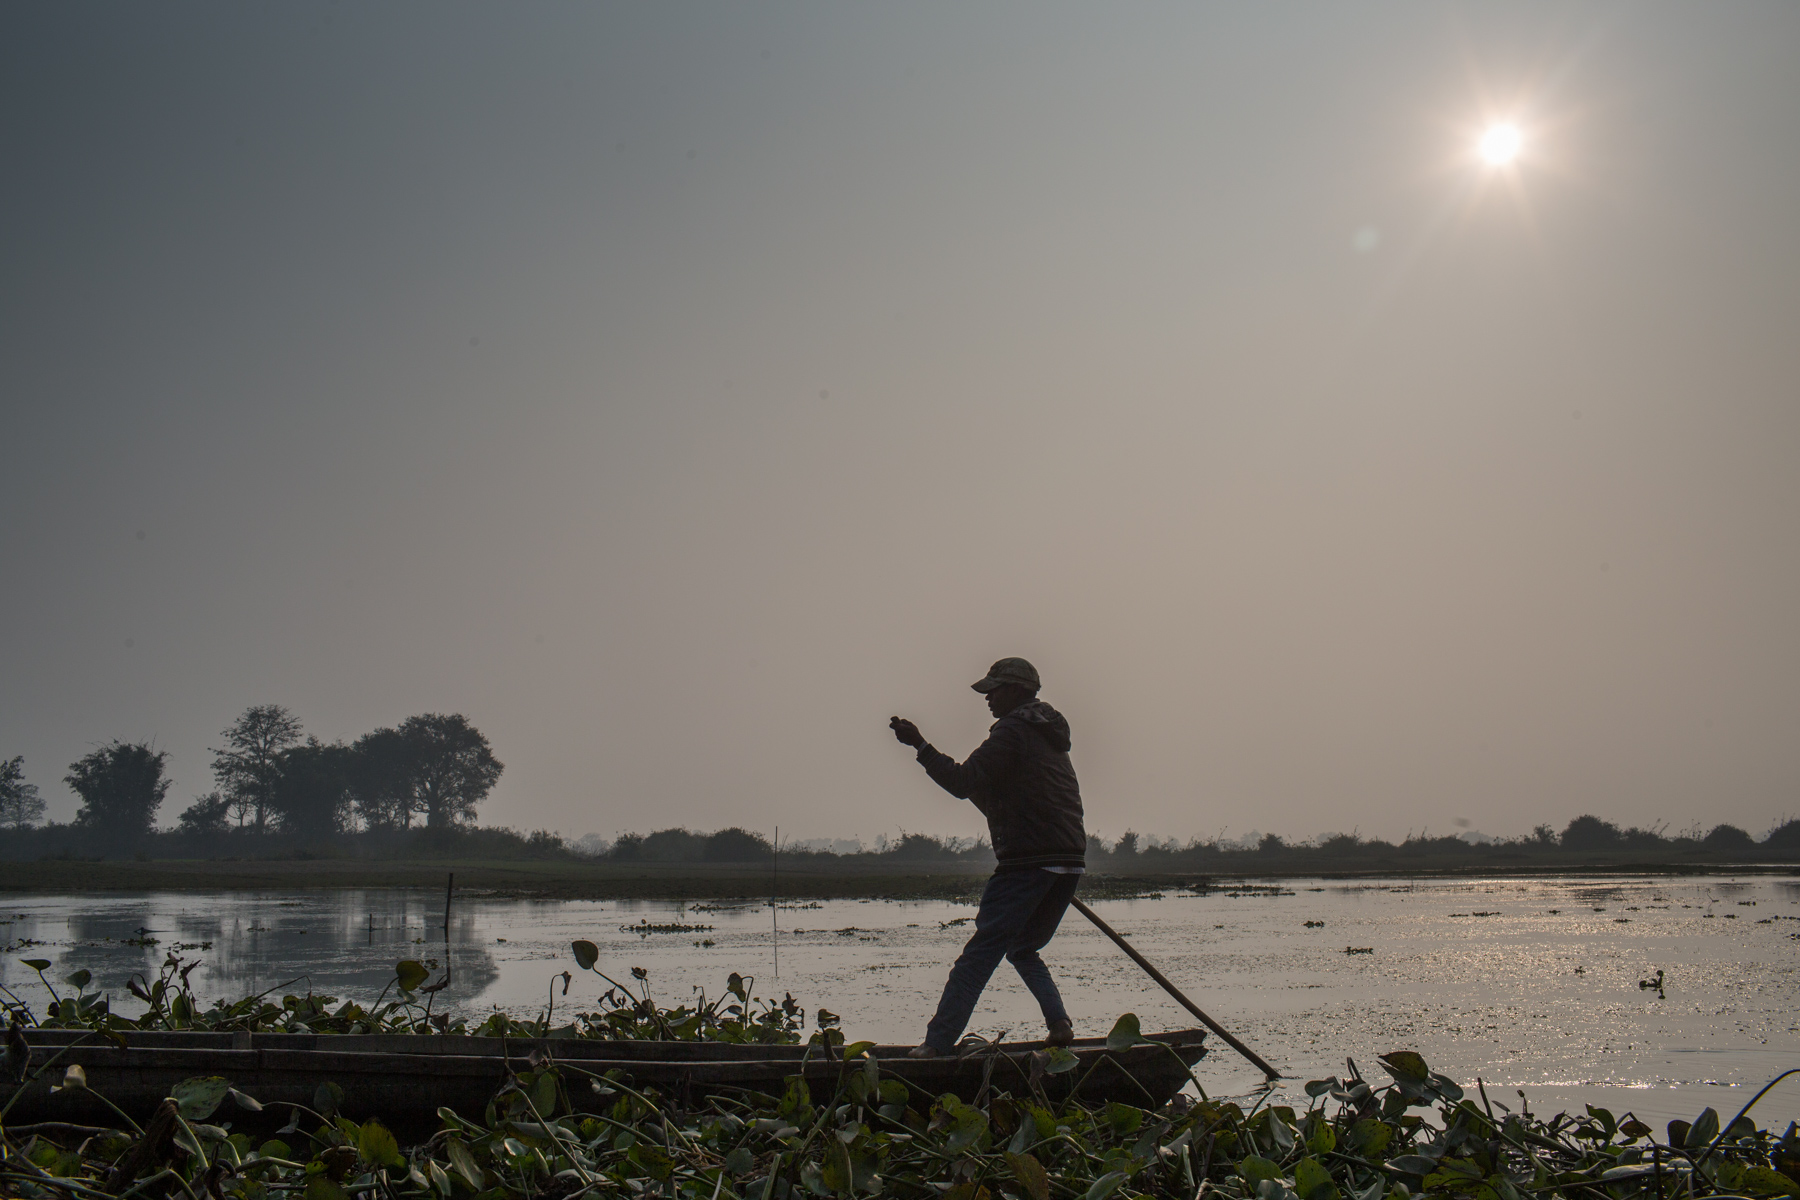 <p>Fisherman by the Koshi River in eastern Nepal. This area was declared a wetland of international importance in 1987—the first in the country [image by: Nabin Baral]</p>